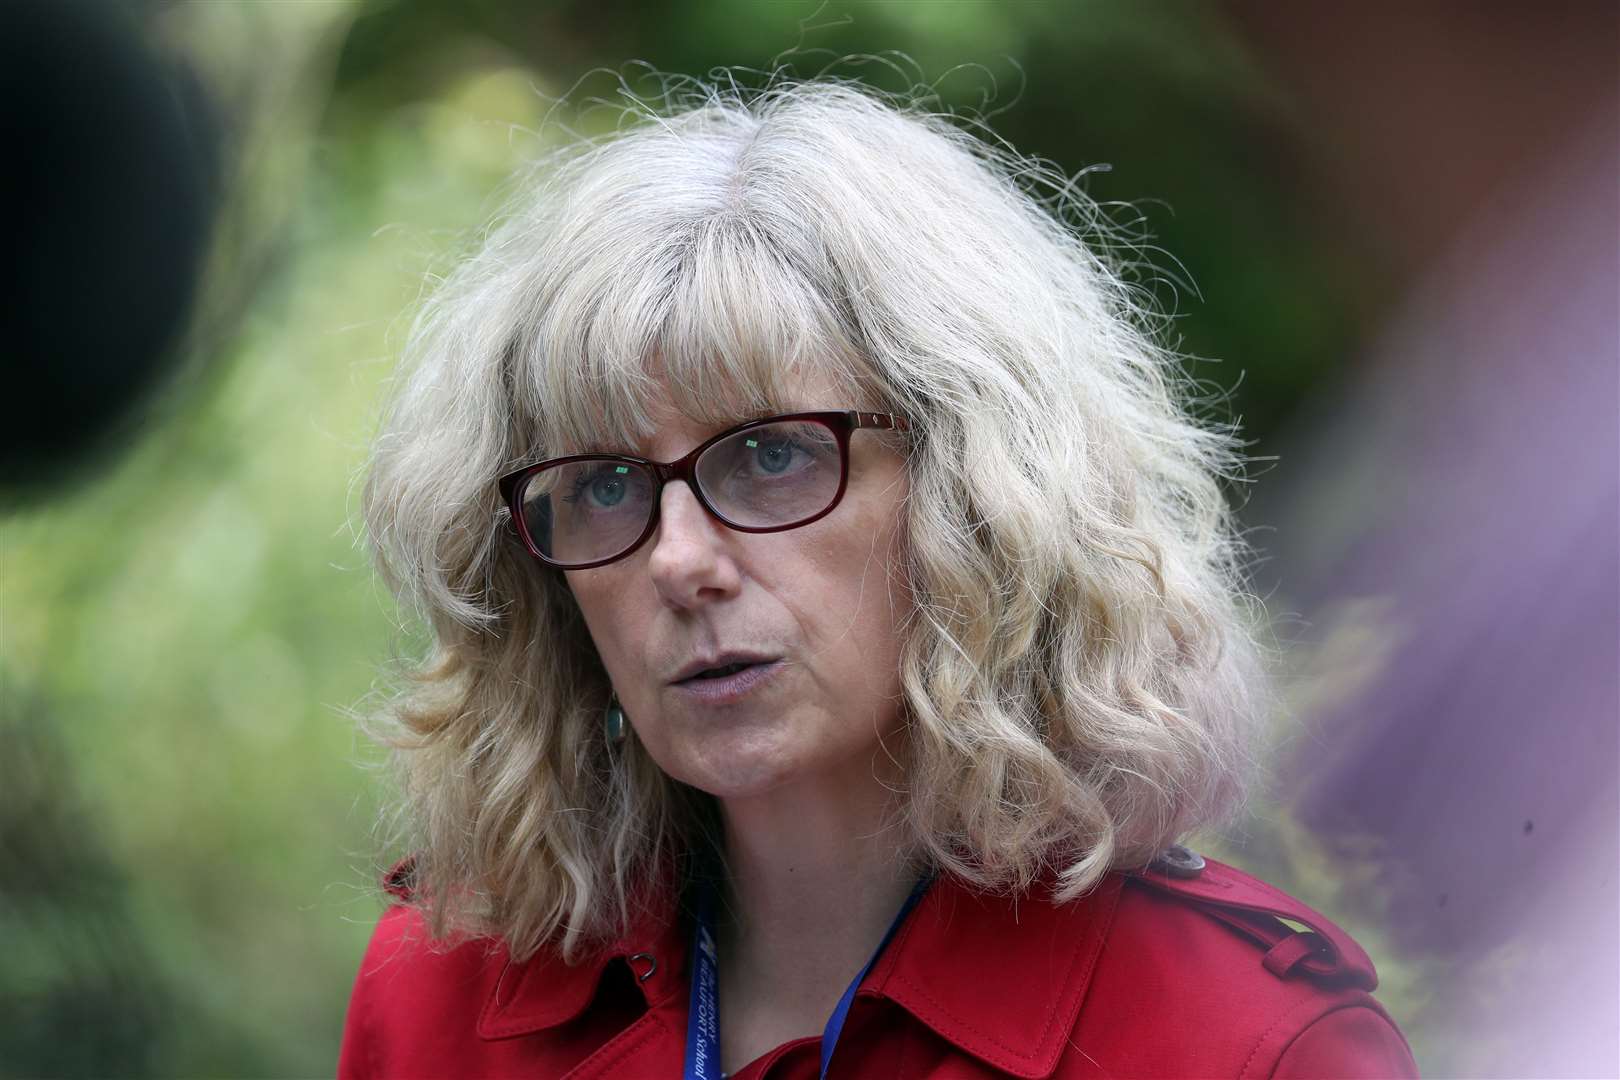 Henry Beaufort School headteacher Sue Hearle said she was ‘extremely relieved’ the incident was not more serious (Andrew Matthews/PA)